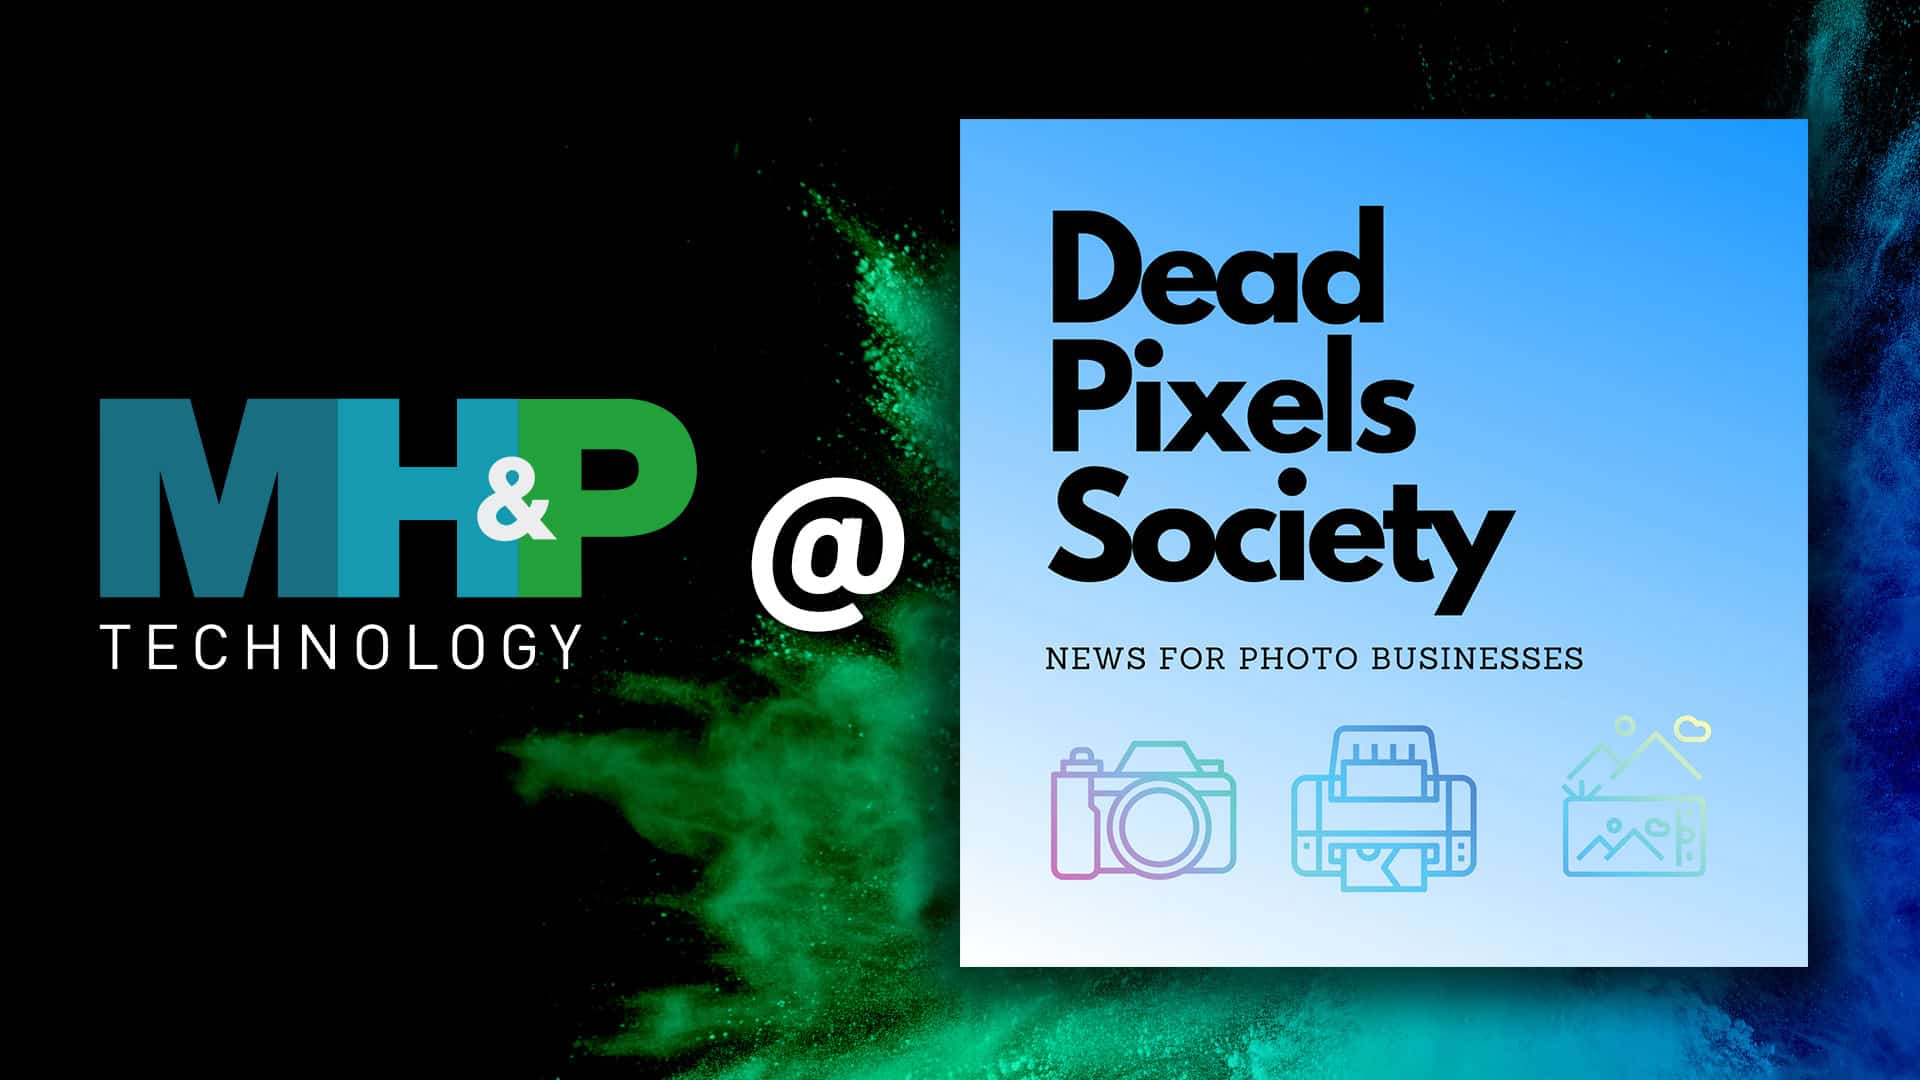 MHP Technology featured at Dead Pixels Society